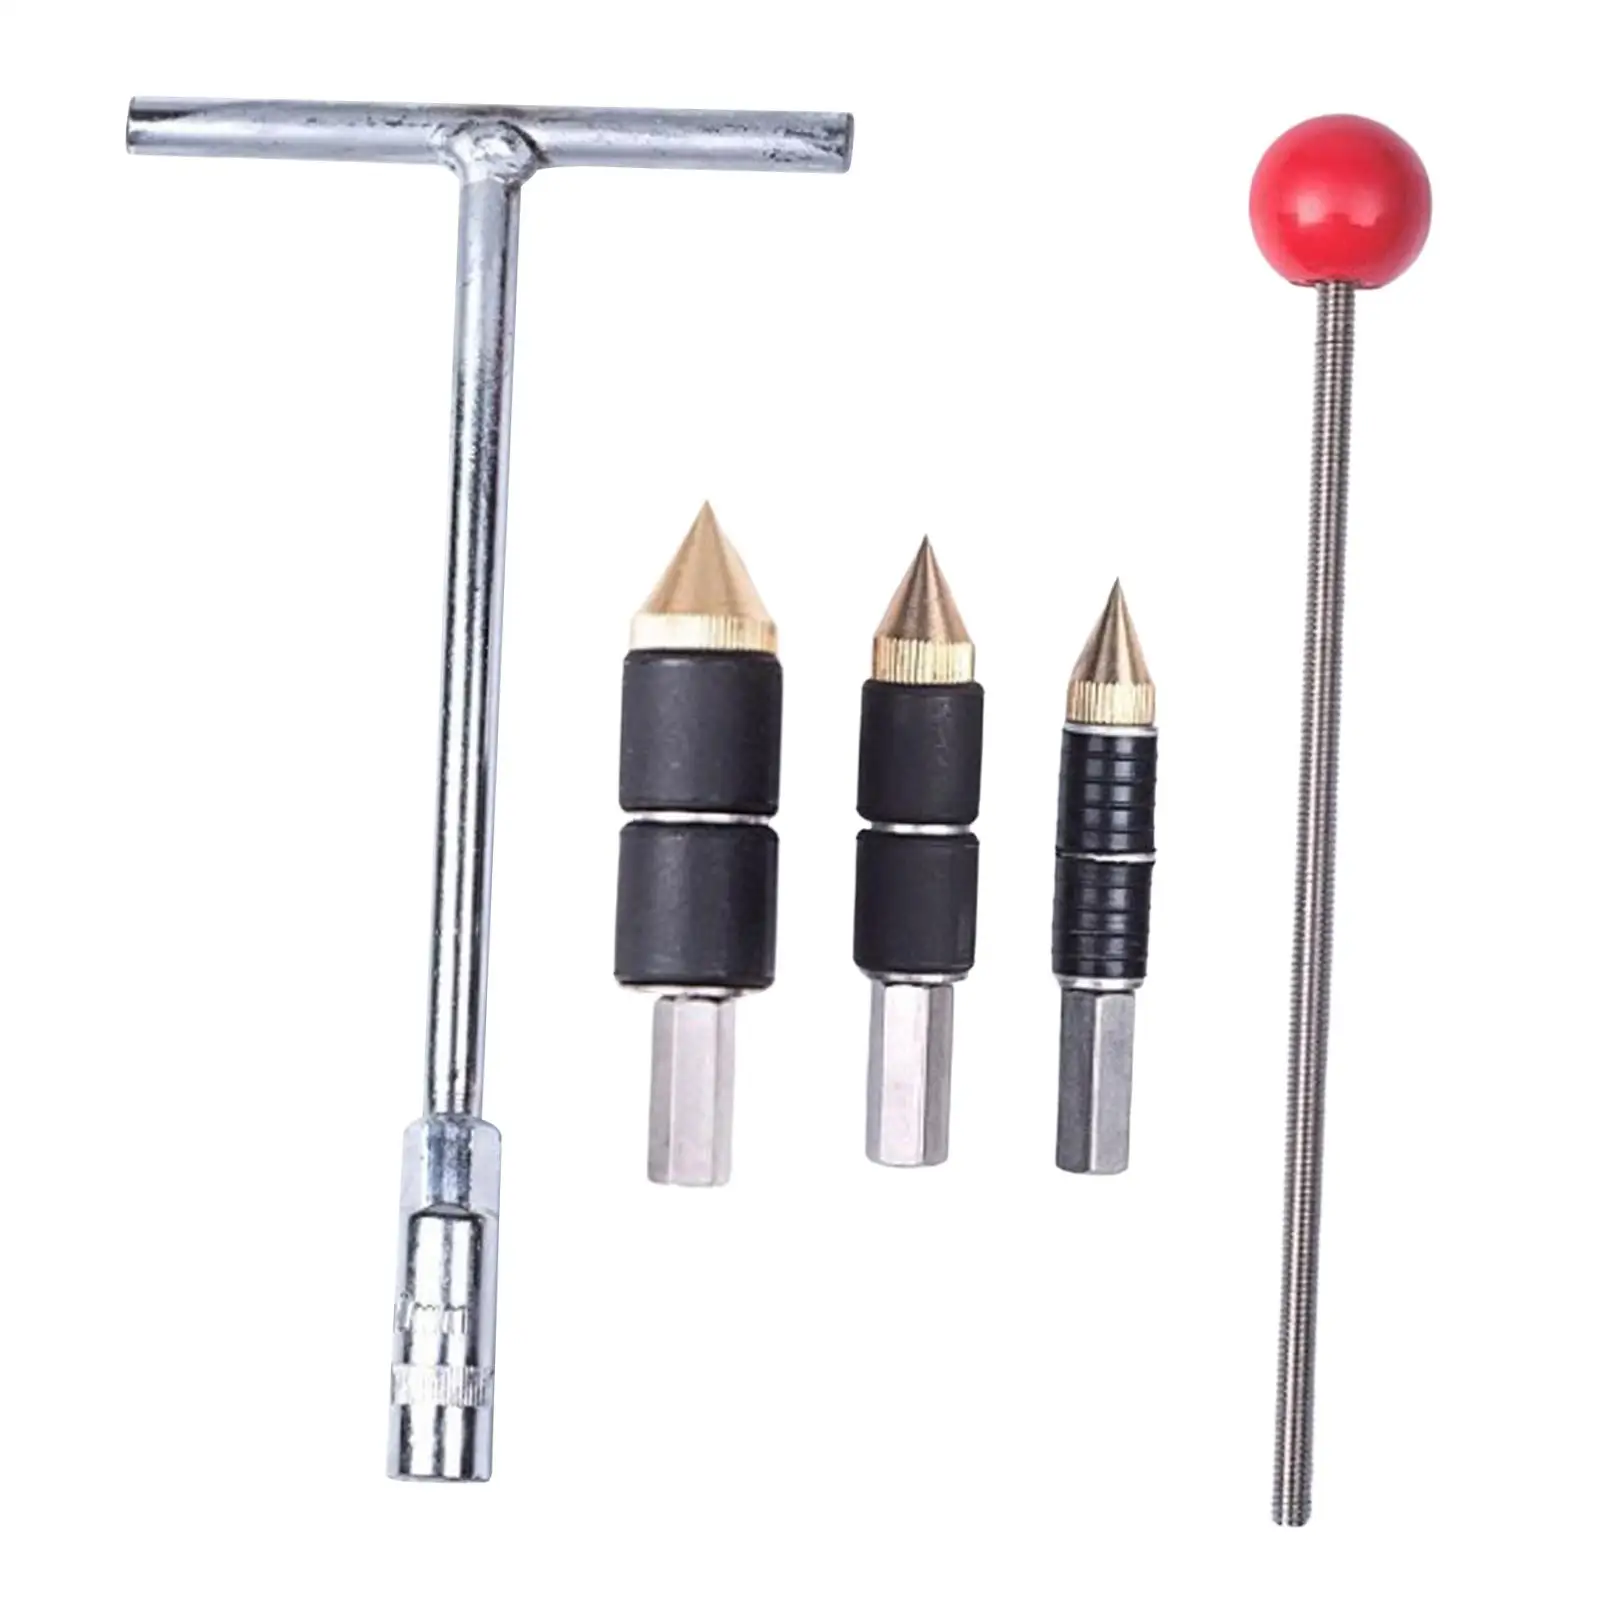 Stainless Steel Hot Melt water pin Durable Spare Parts Waterstop Accessories Portable Repair Tools for Bathroom Plugging